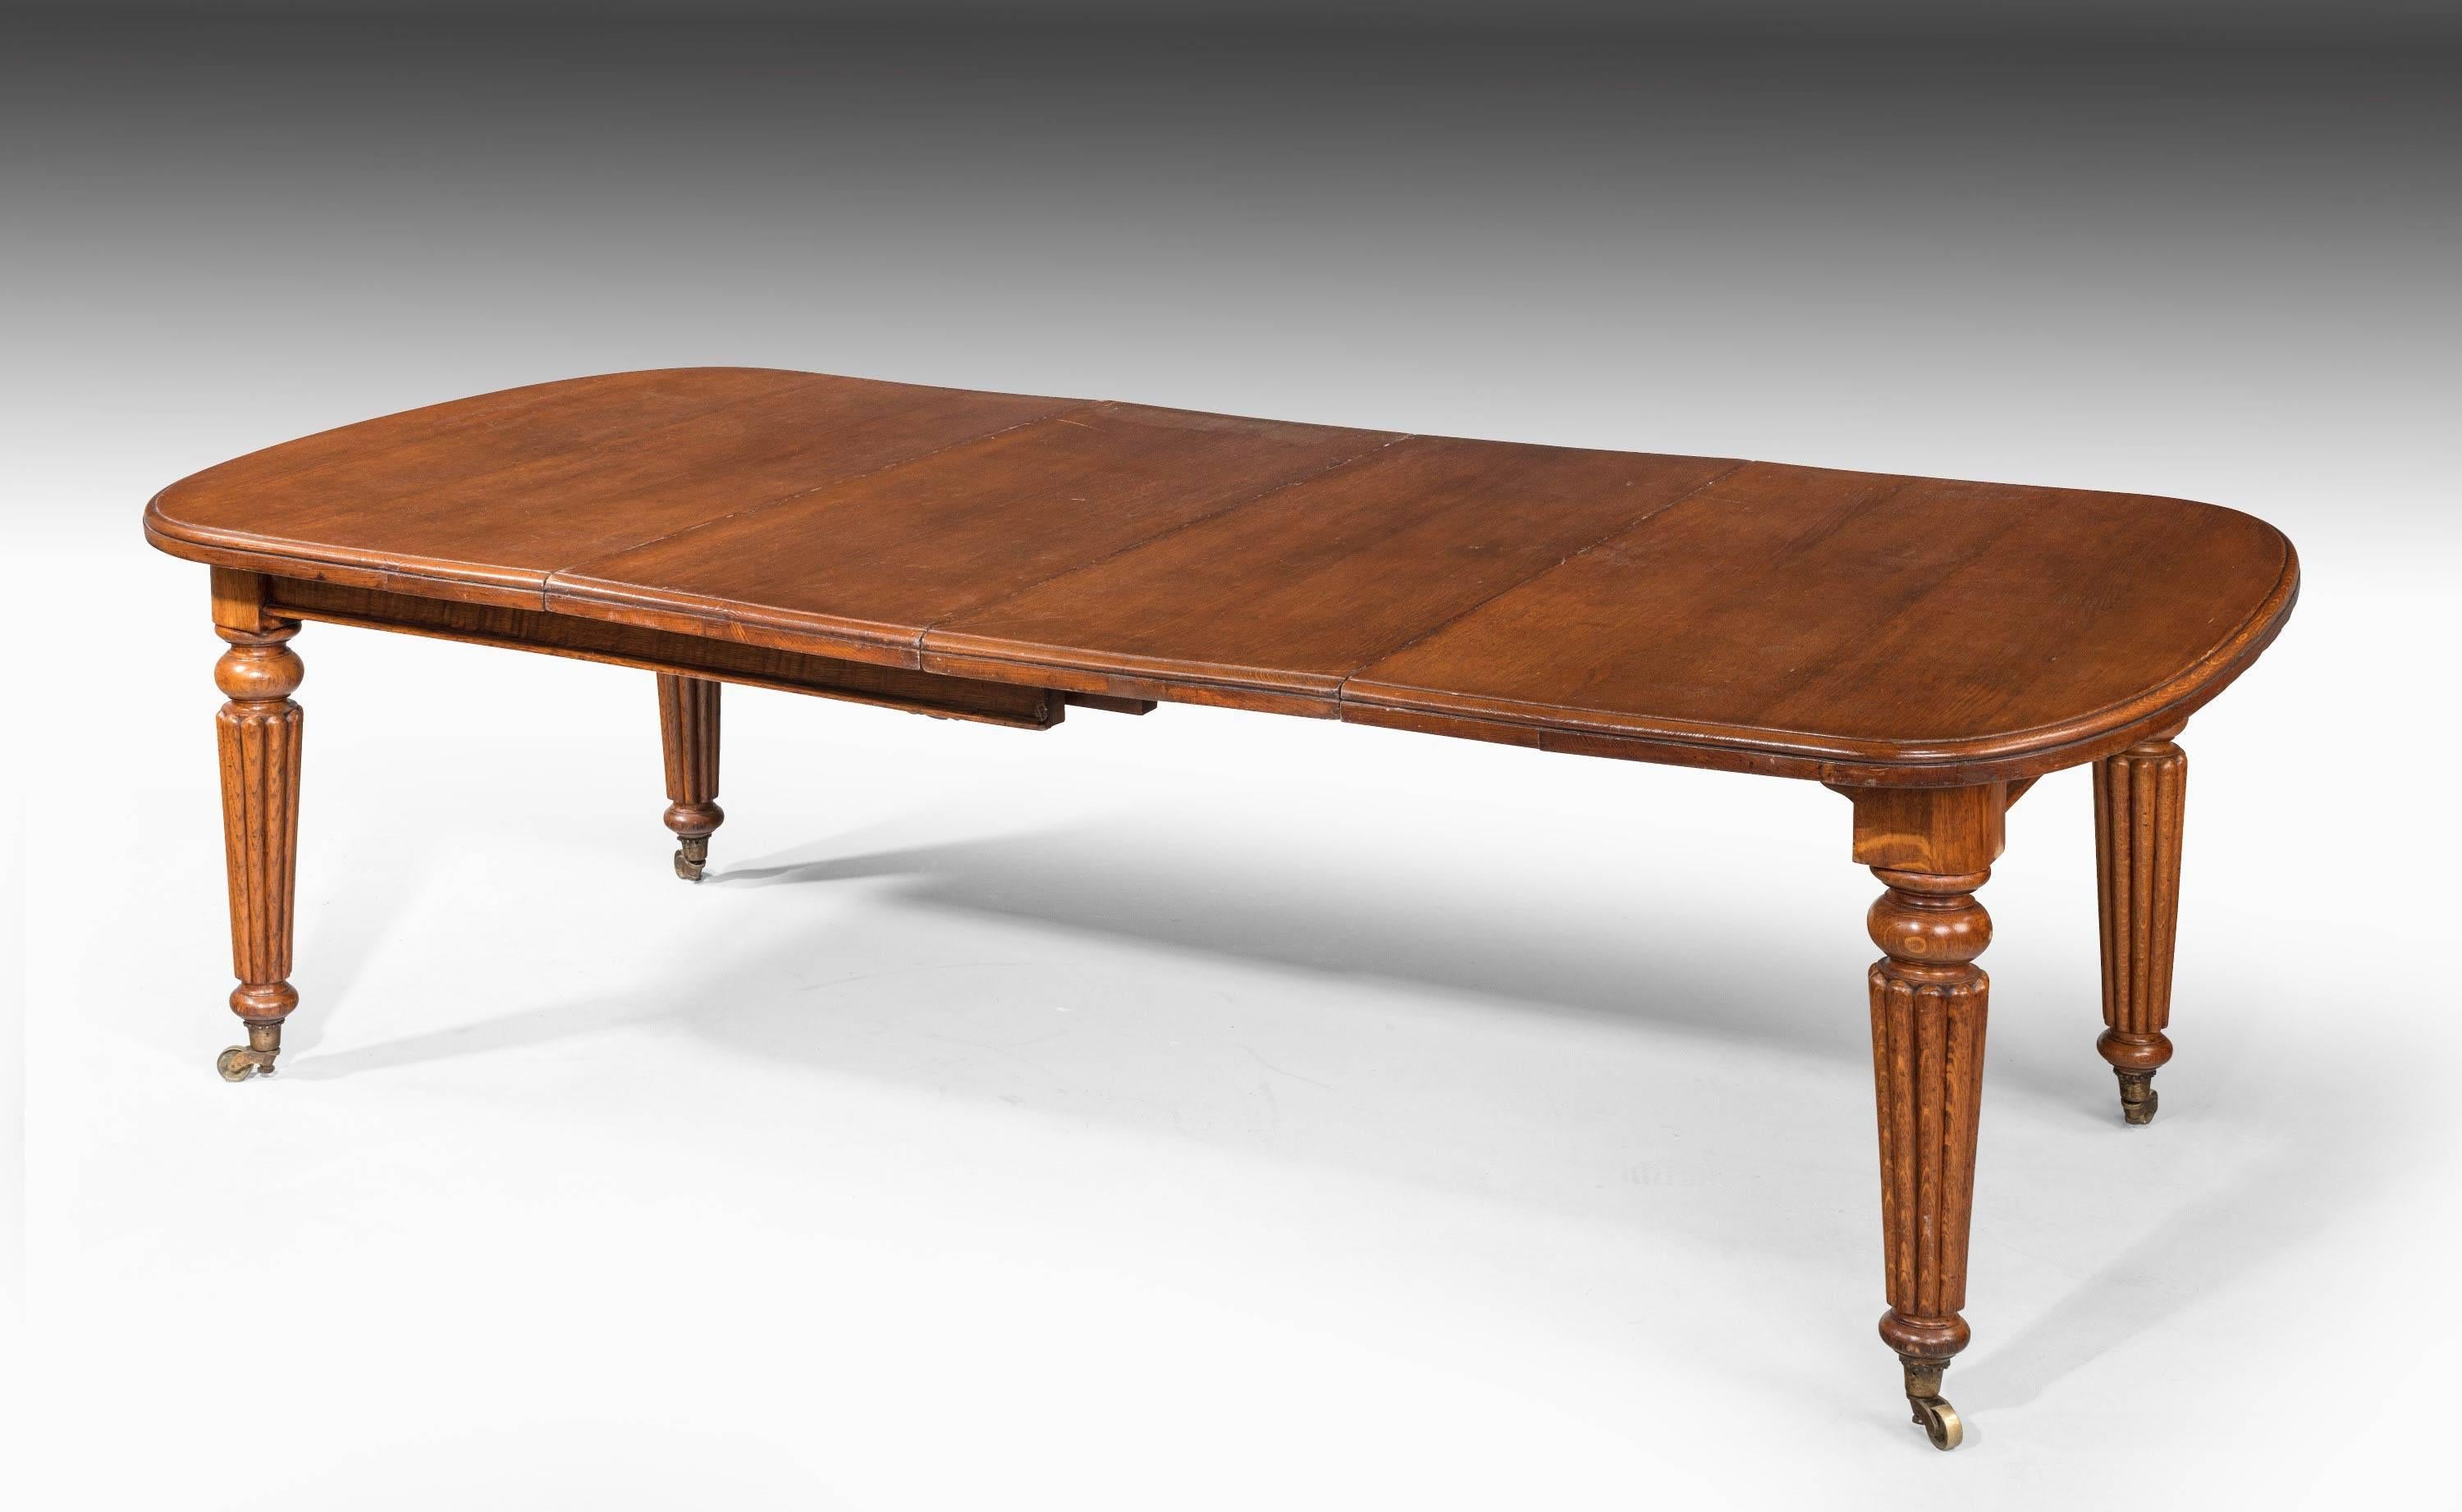 A late Regency period mahogany extending dining table. The supports very well carved with reeded decoration. Retaining the original shoes and castors.

With one leaf 73.5 inches.

With no leaves 57 inches.